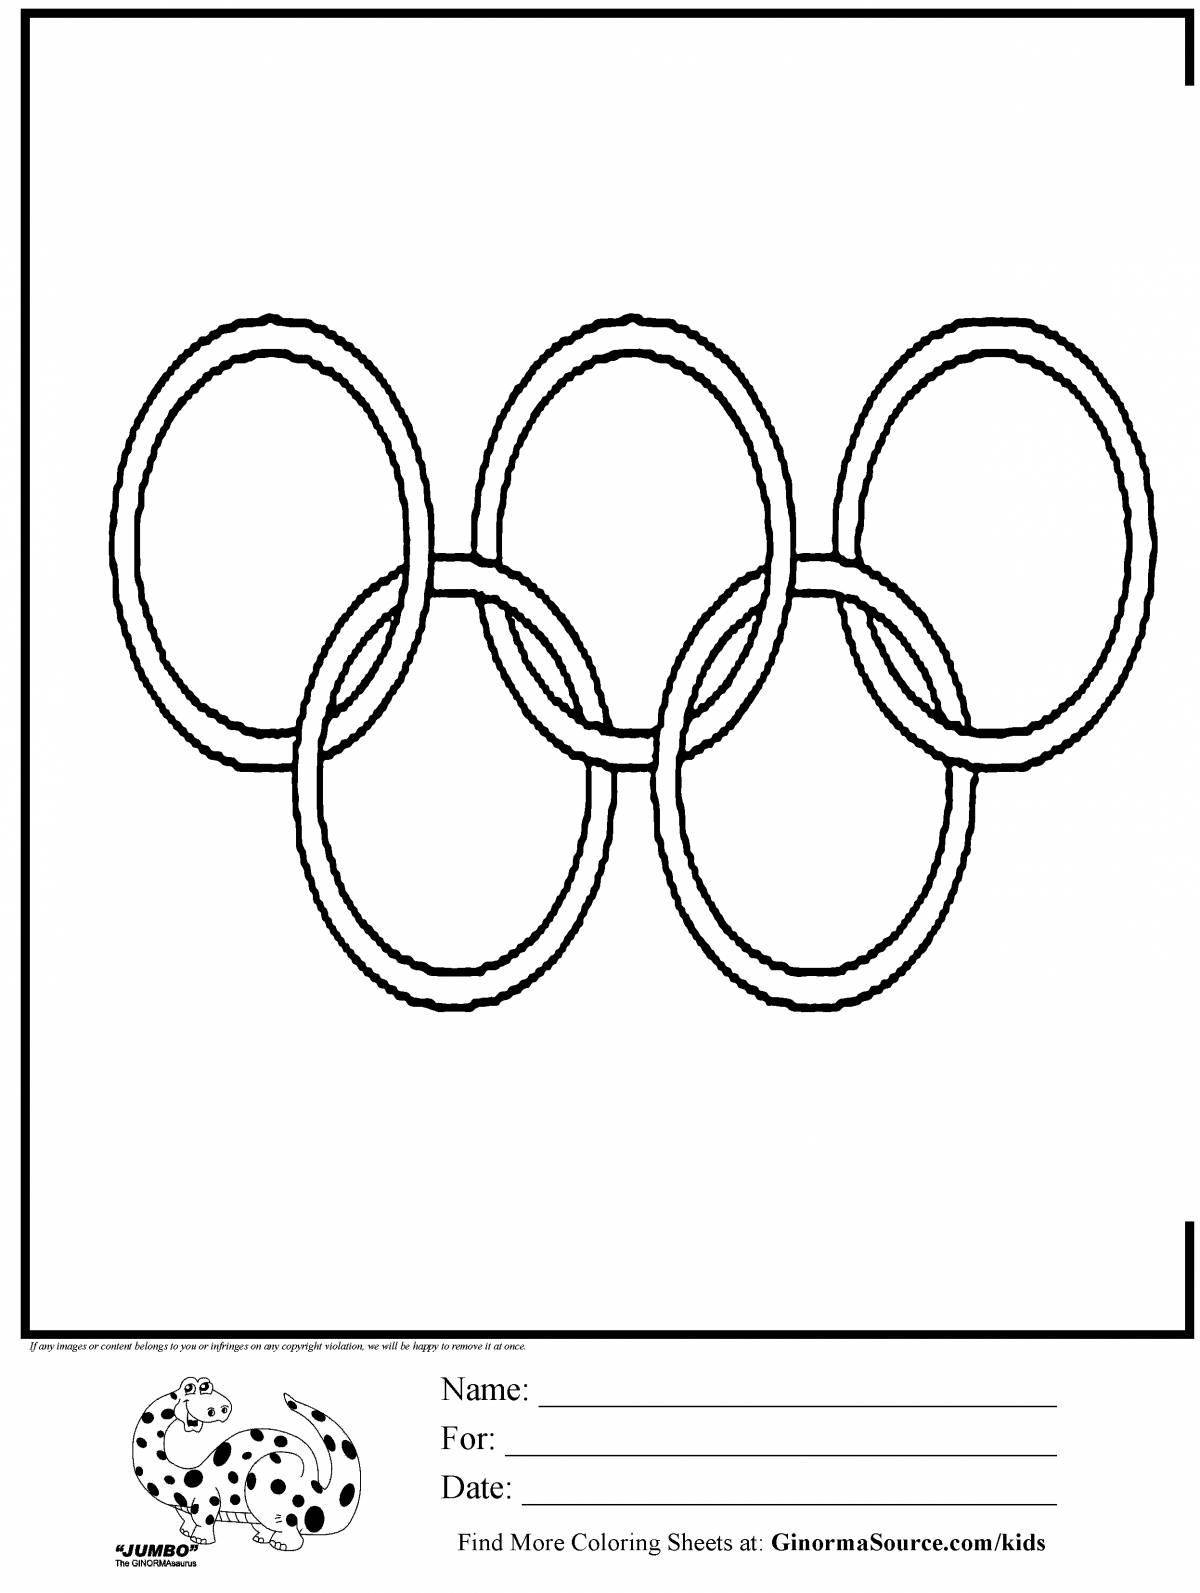 Printable bright Olympic rings coloring page